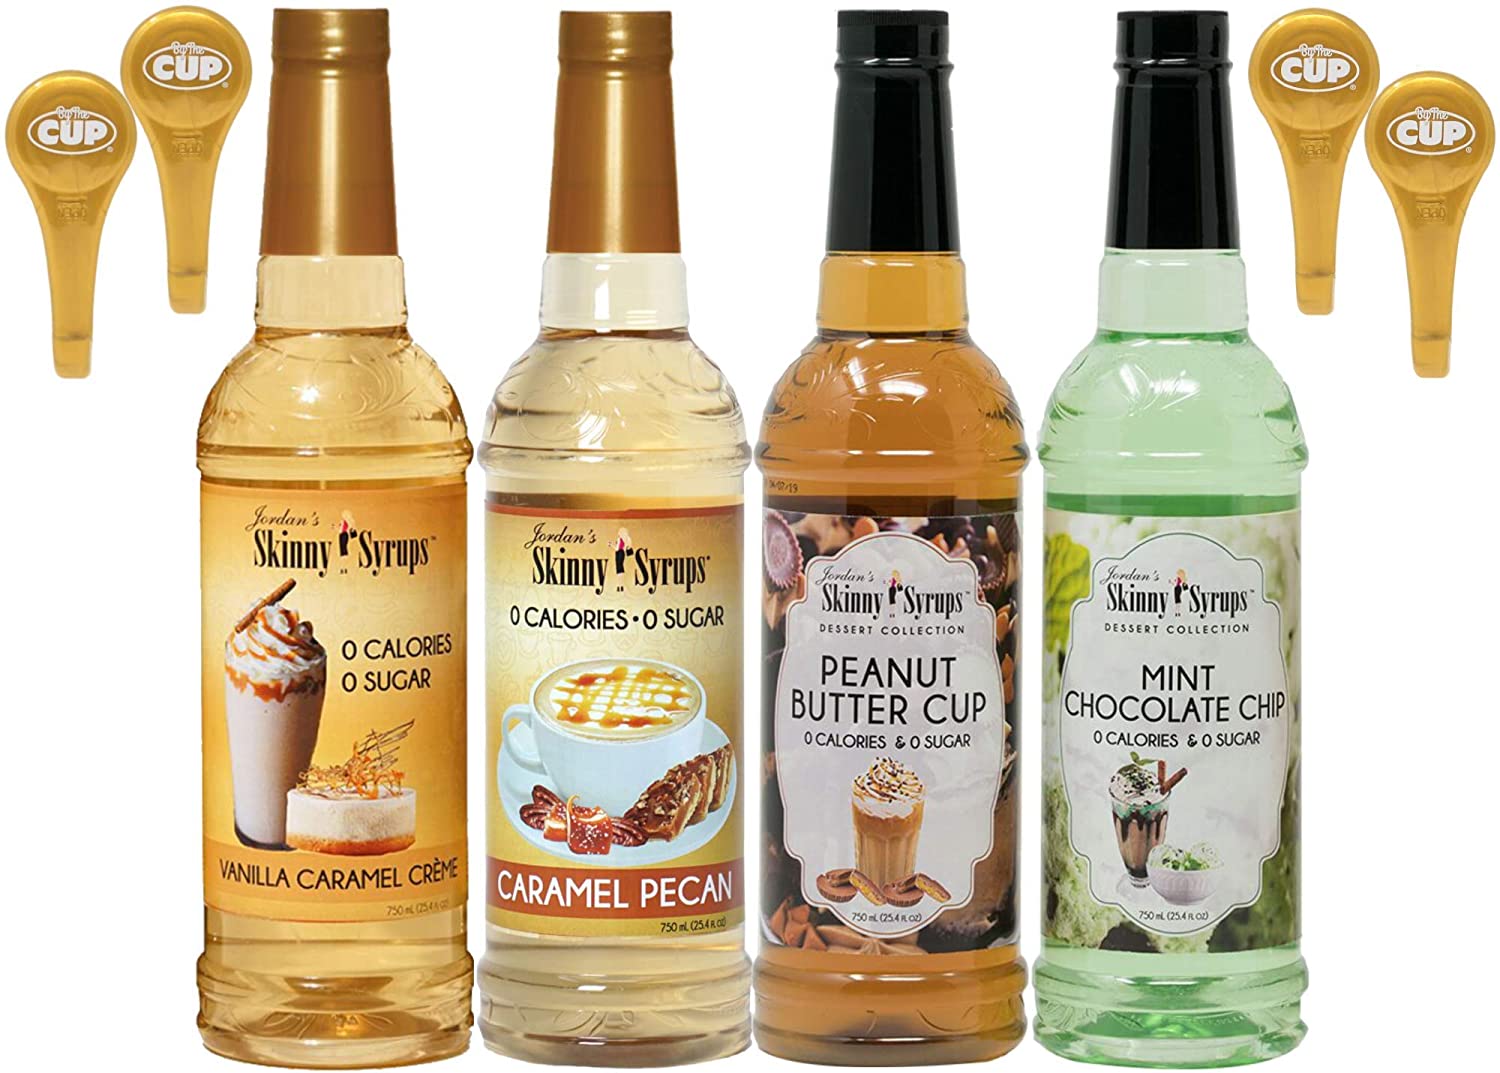 Jordan's Skinny Syrups Sugar Free Vanilla Caramel, Caramel Pecan, Mint Chocolate Chip, Peanut Butter 750 ml Bottles (Pack of 4) with 4 By The Cup Pumps